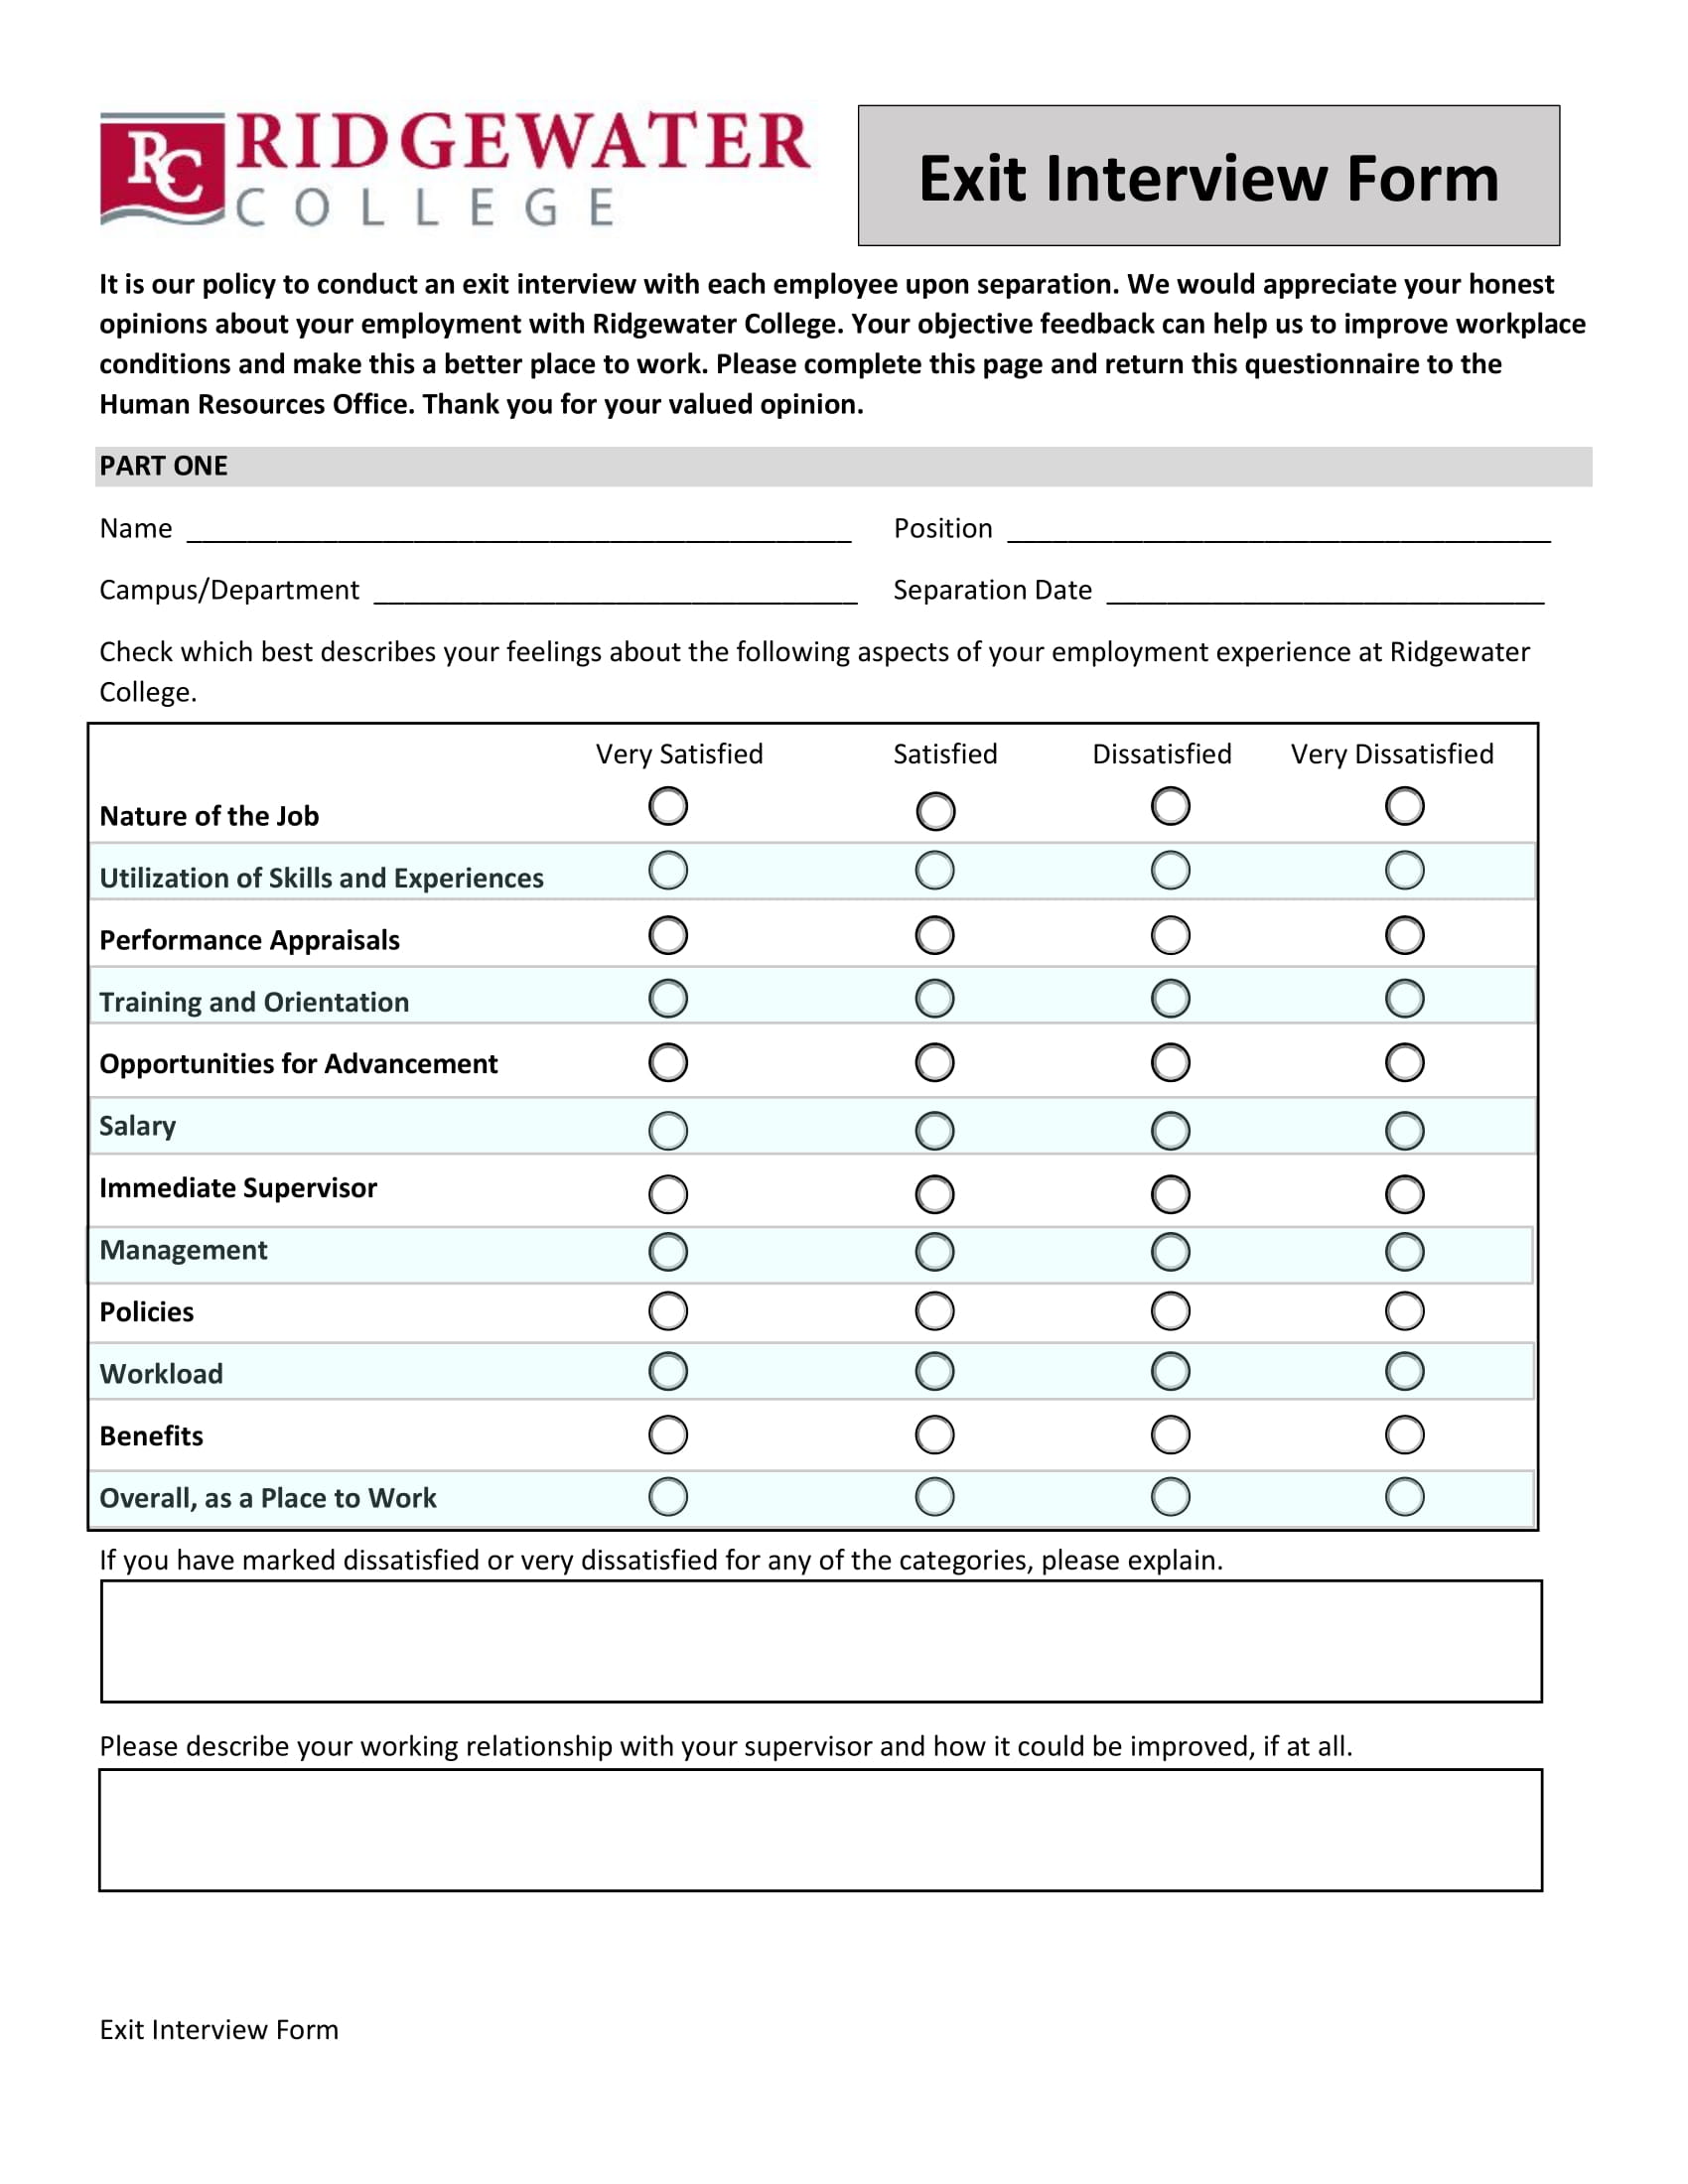 fillable exit interview form 1